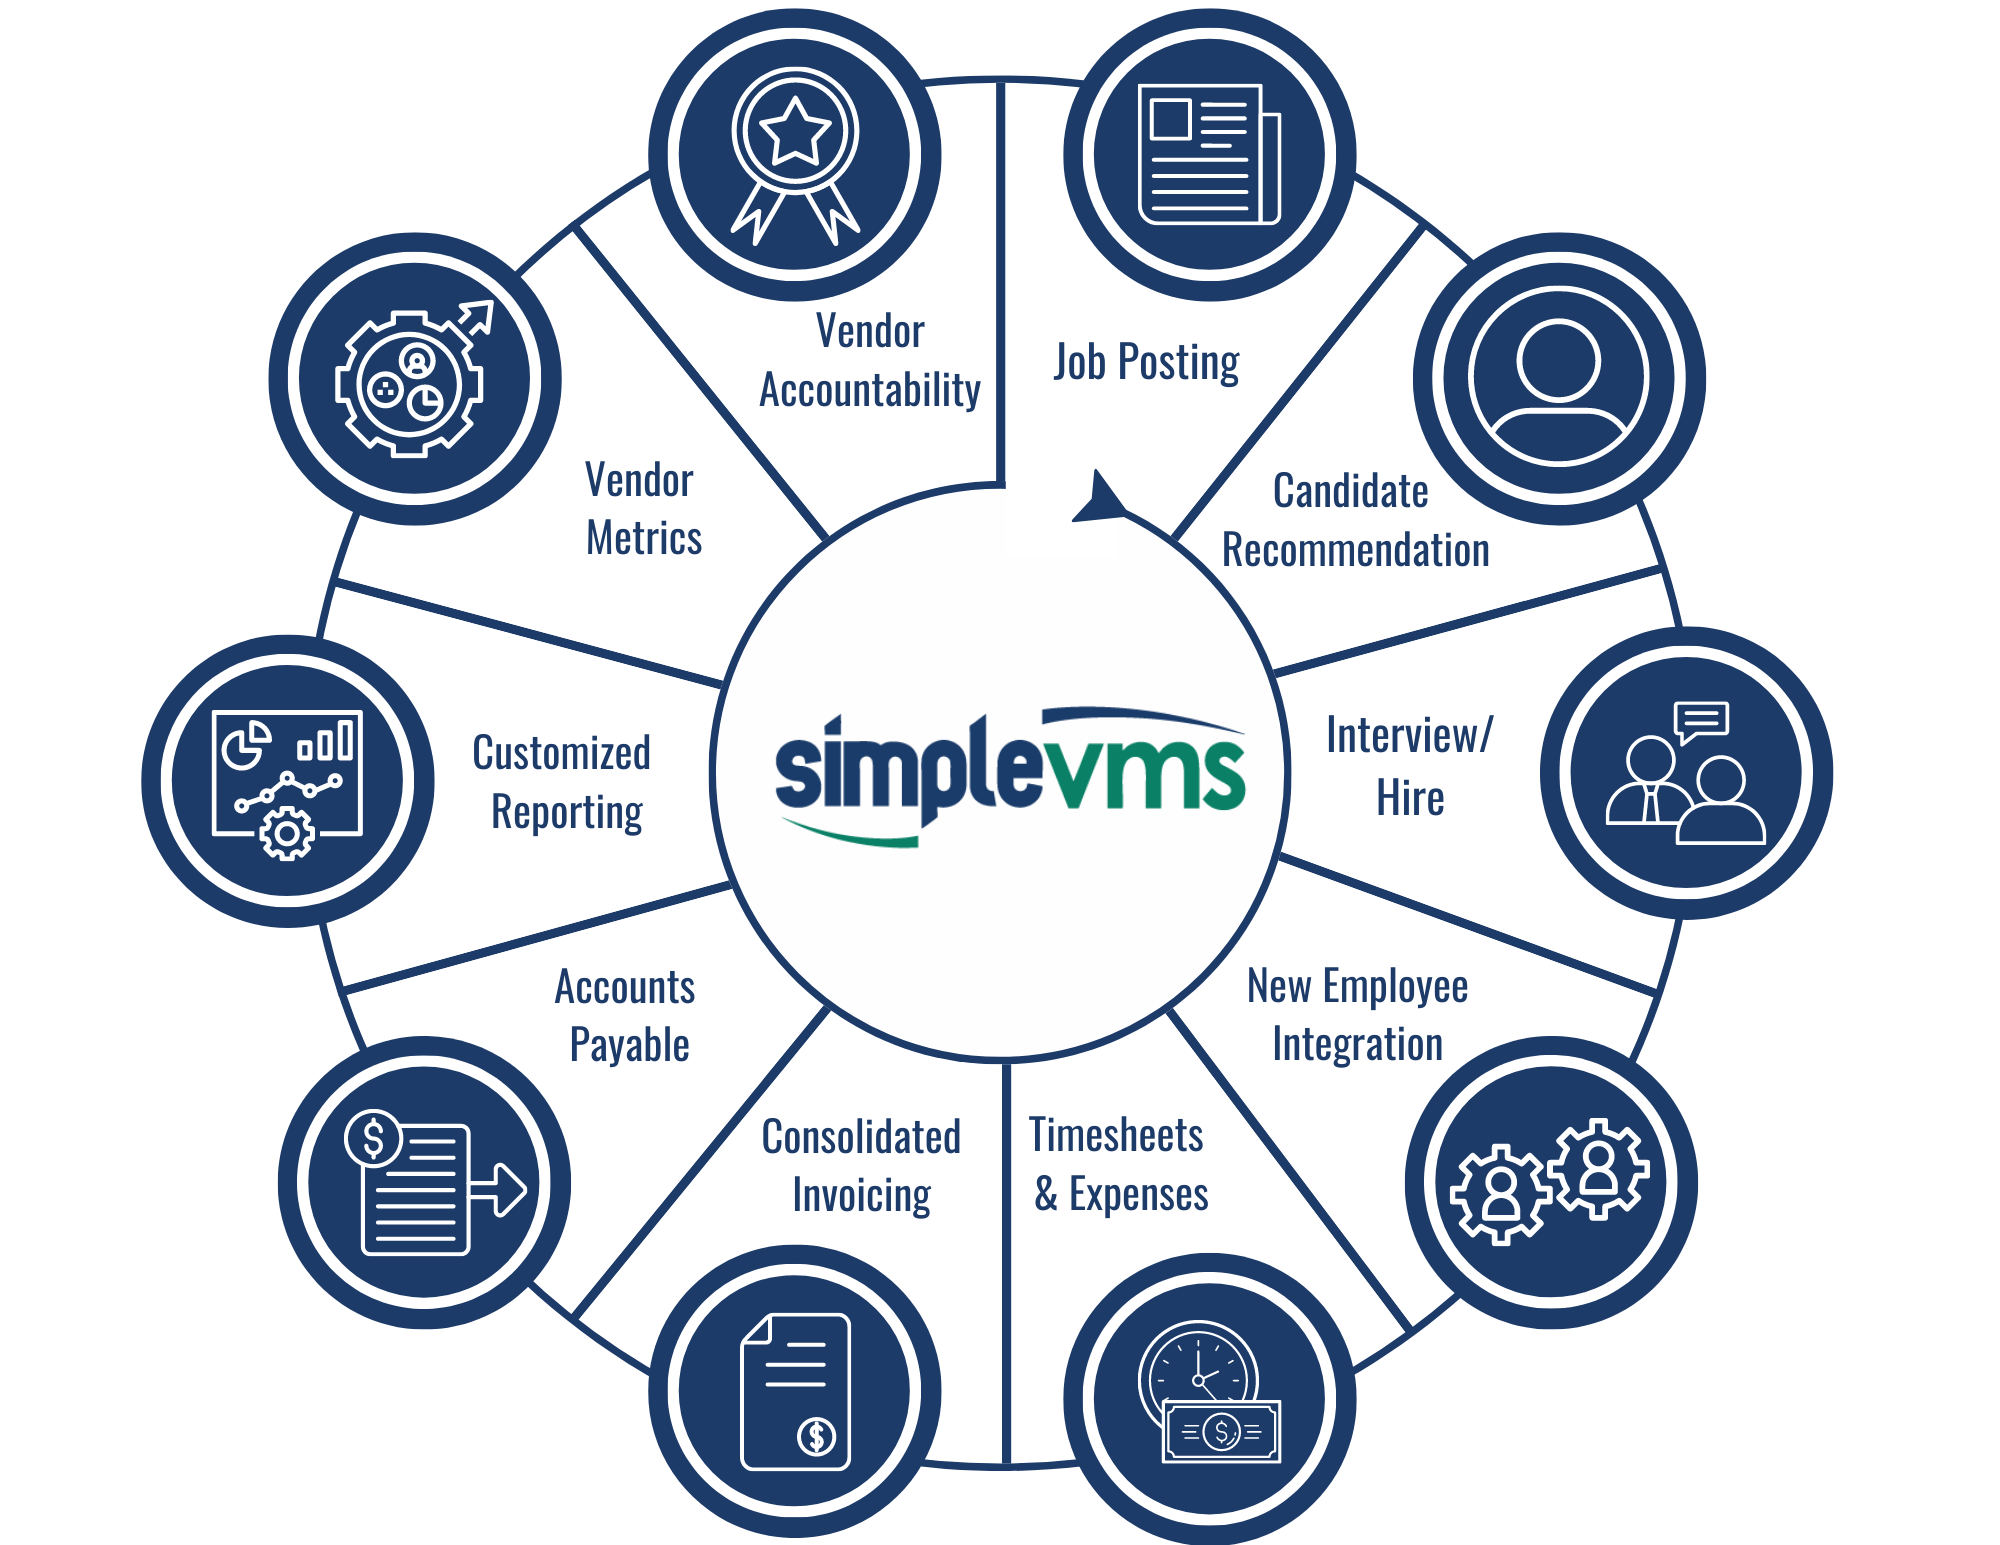 SimpleVMS functionality